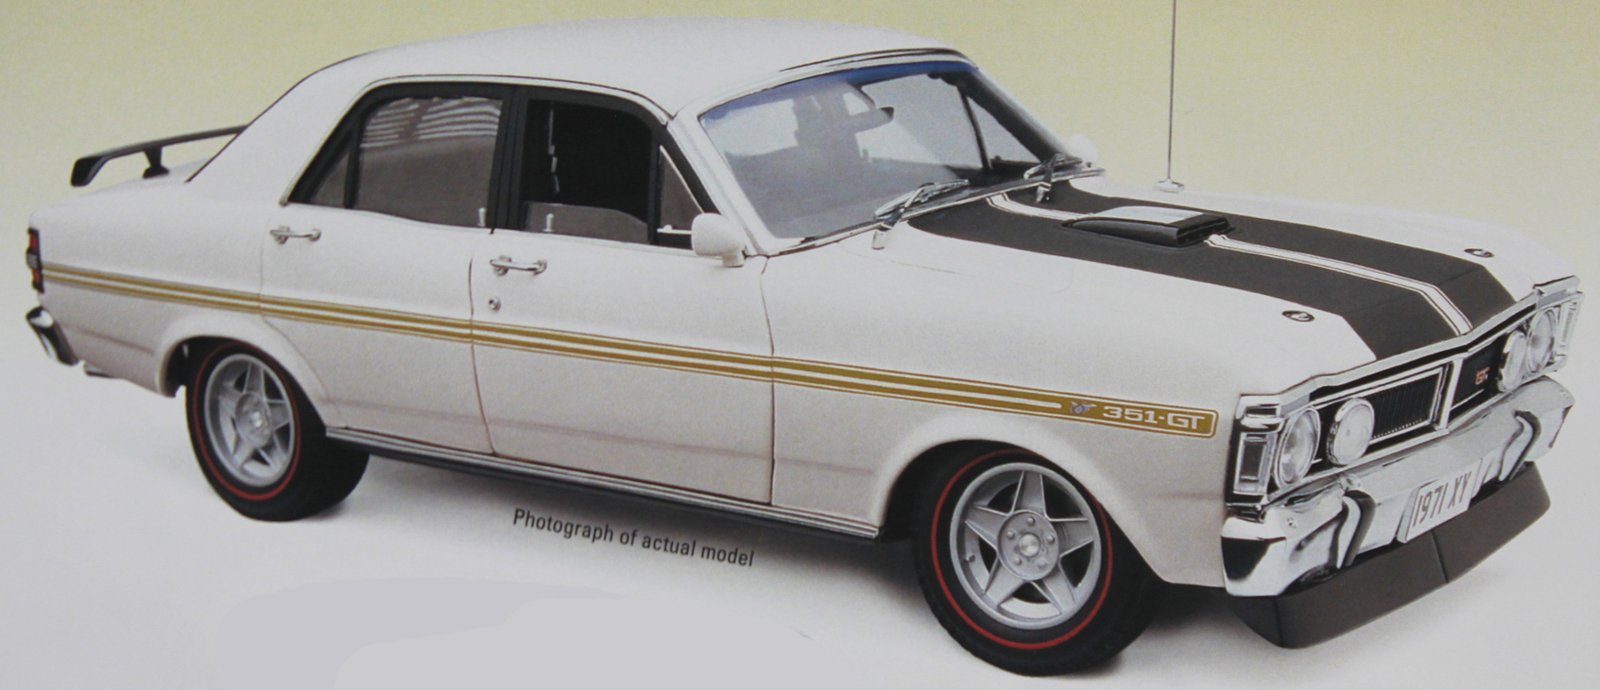 PRE ORDER - Ford XY Falcon Phase III GT-HO Ultra White 1:18 Scale Model Car (FULL PRICE - $279)